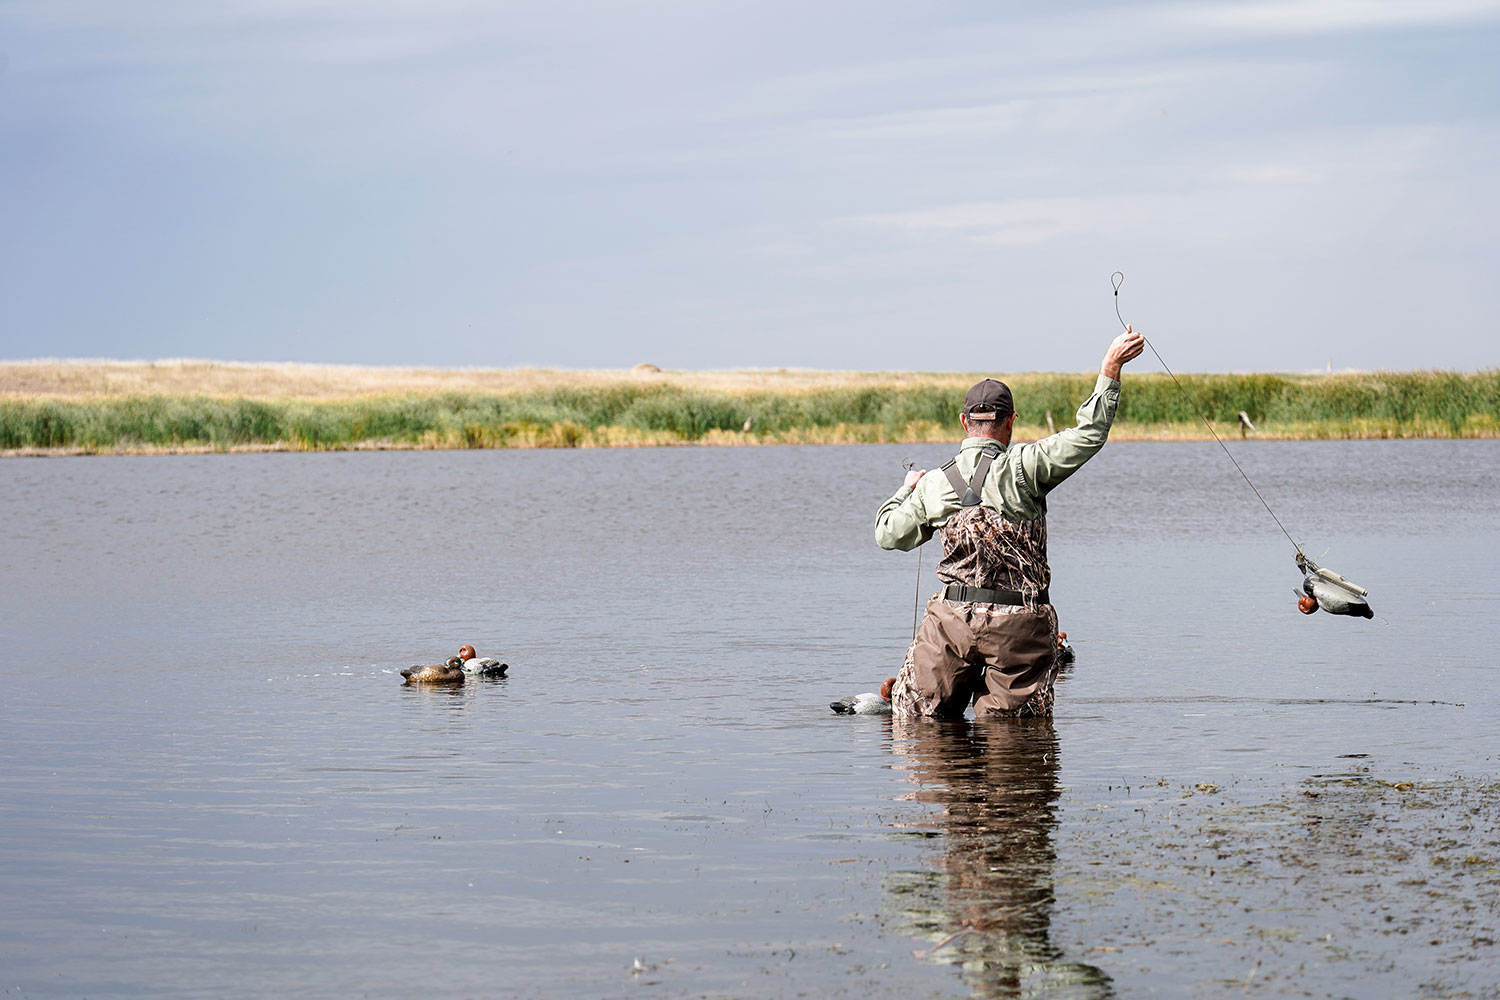 Duck hunter in waders throwing decoys into the water